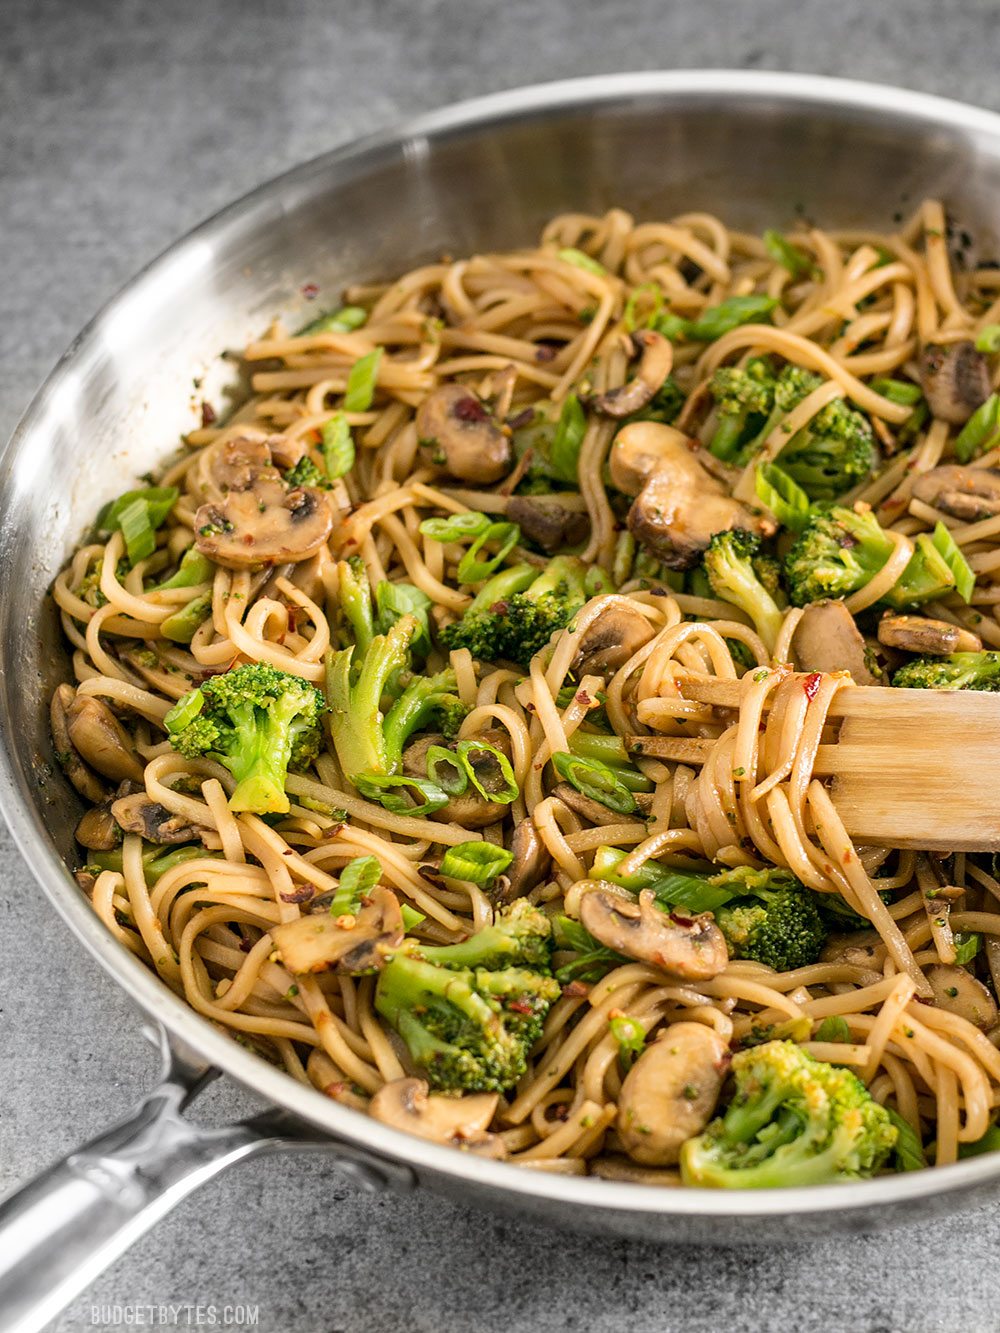 With just a few ingredients you can make these easy and delicious Mushroom Broccoli Stir Fry Noodles for a fast weeknight dinner. BudgetBytes.com